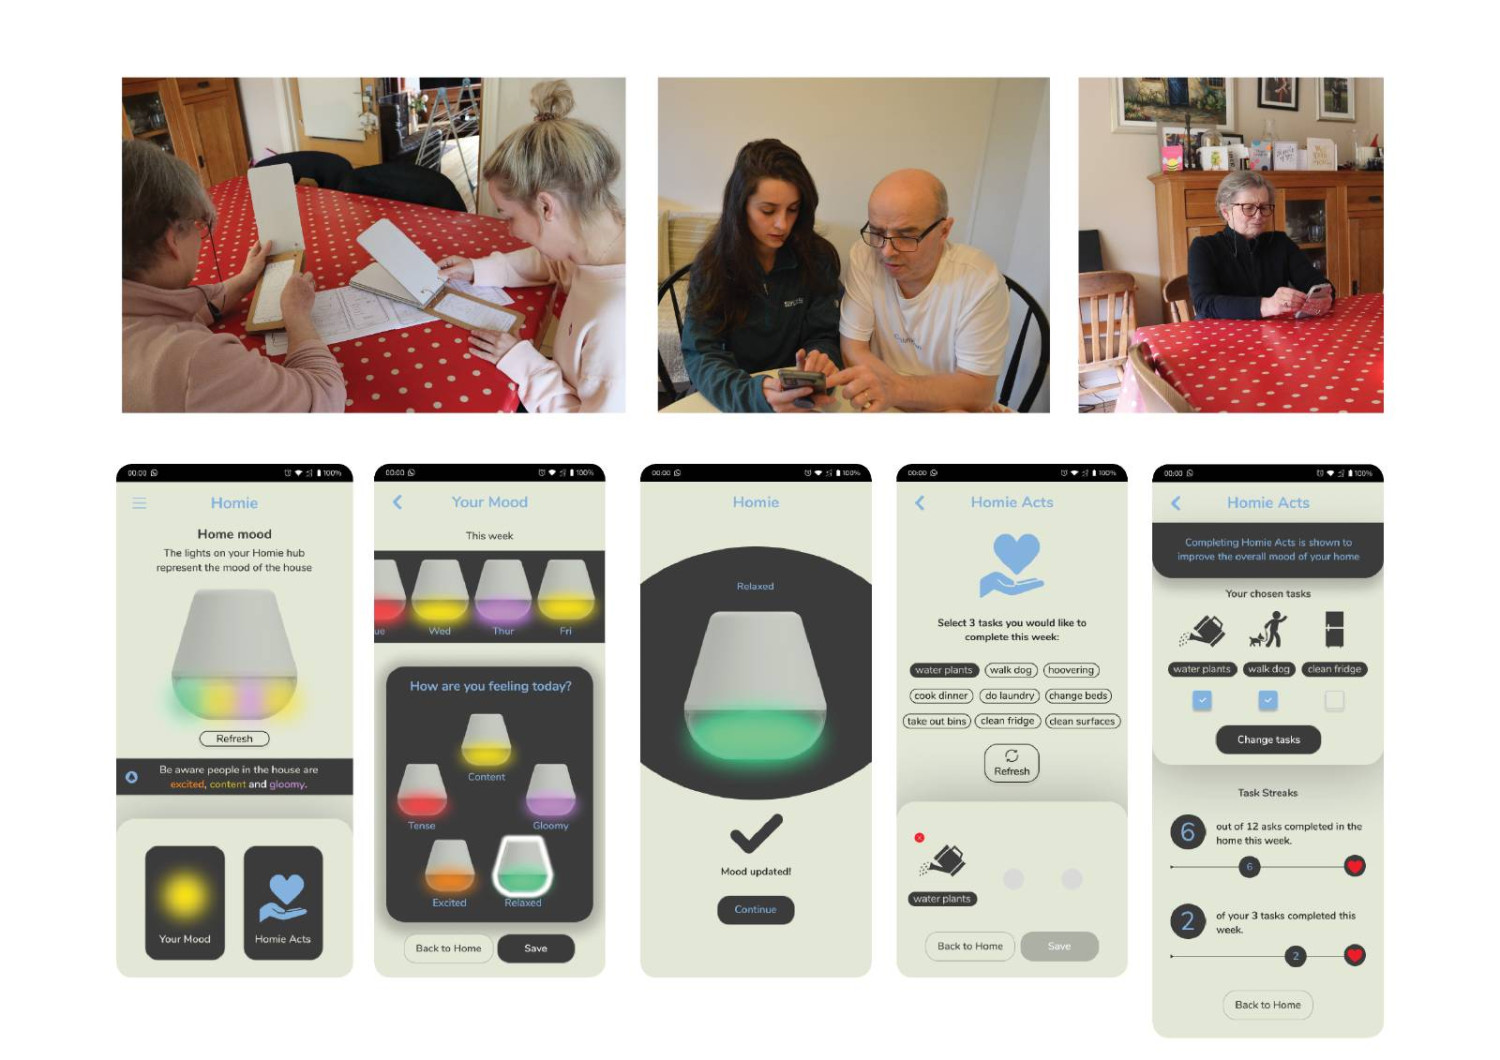 Low-fi prototyping led to the refined app design, optimising user experience through multiple design iterations and user feedback